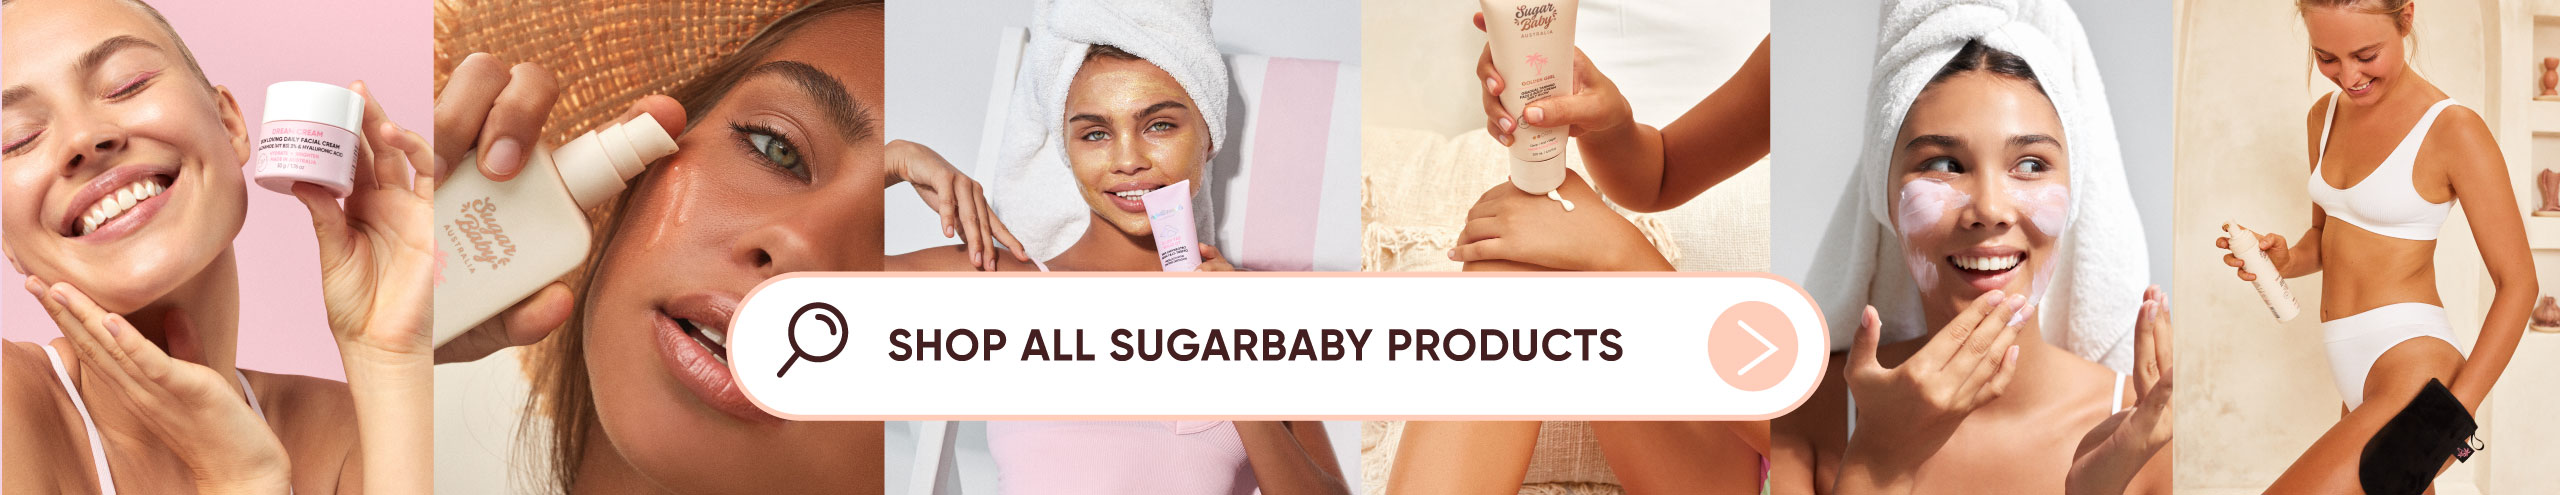 SugarBaby Products